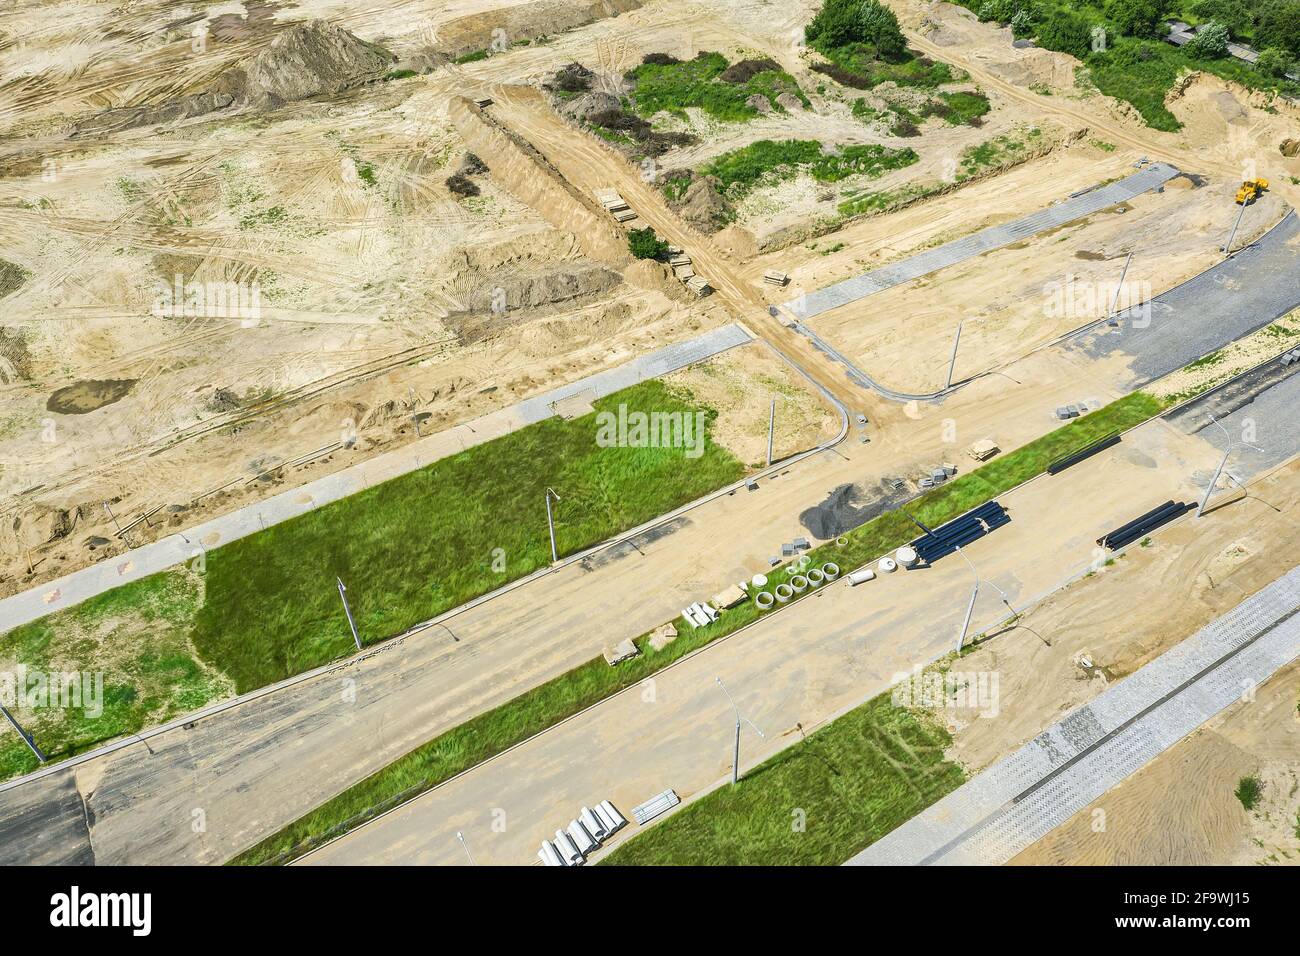 new road under construction. construction site during earthworks progress. aerial view Stock Photo